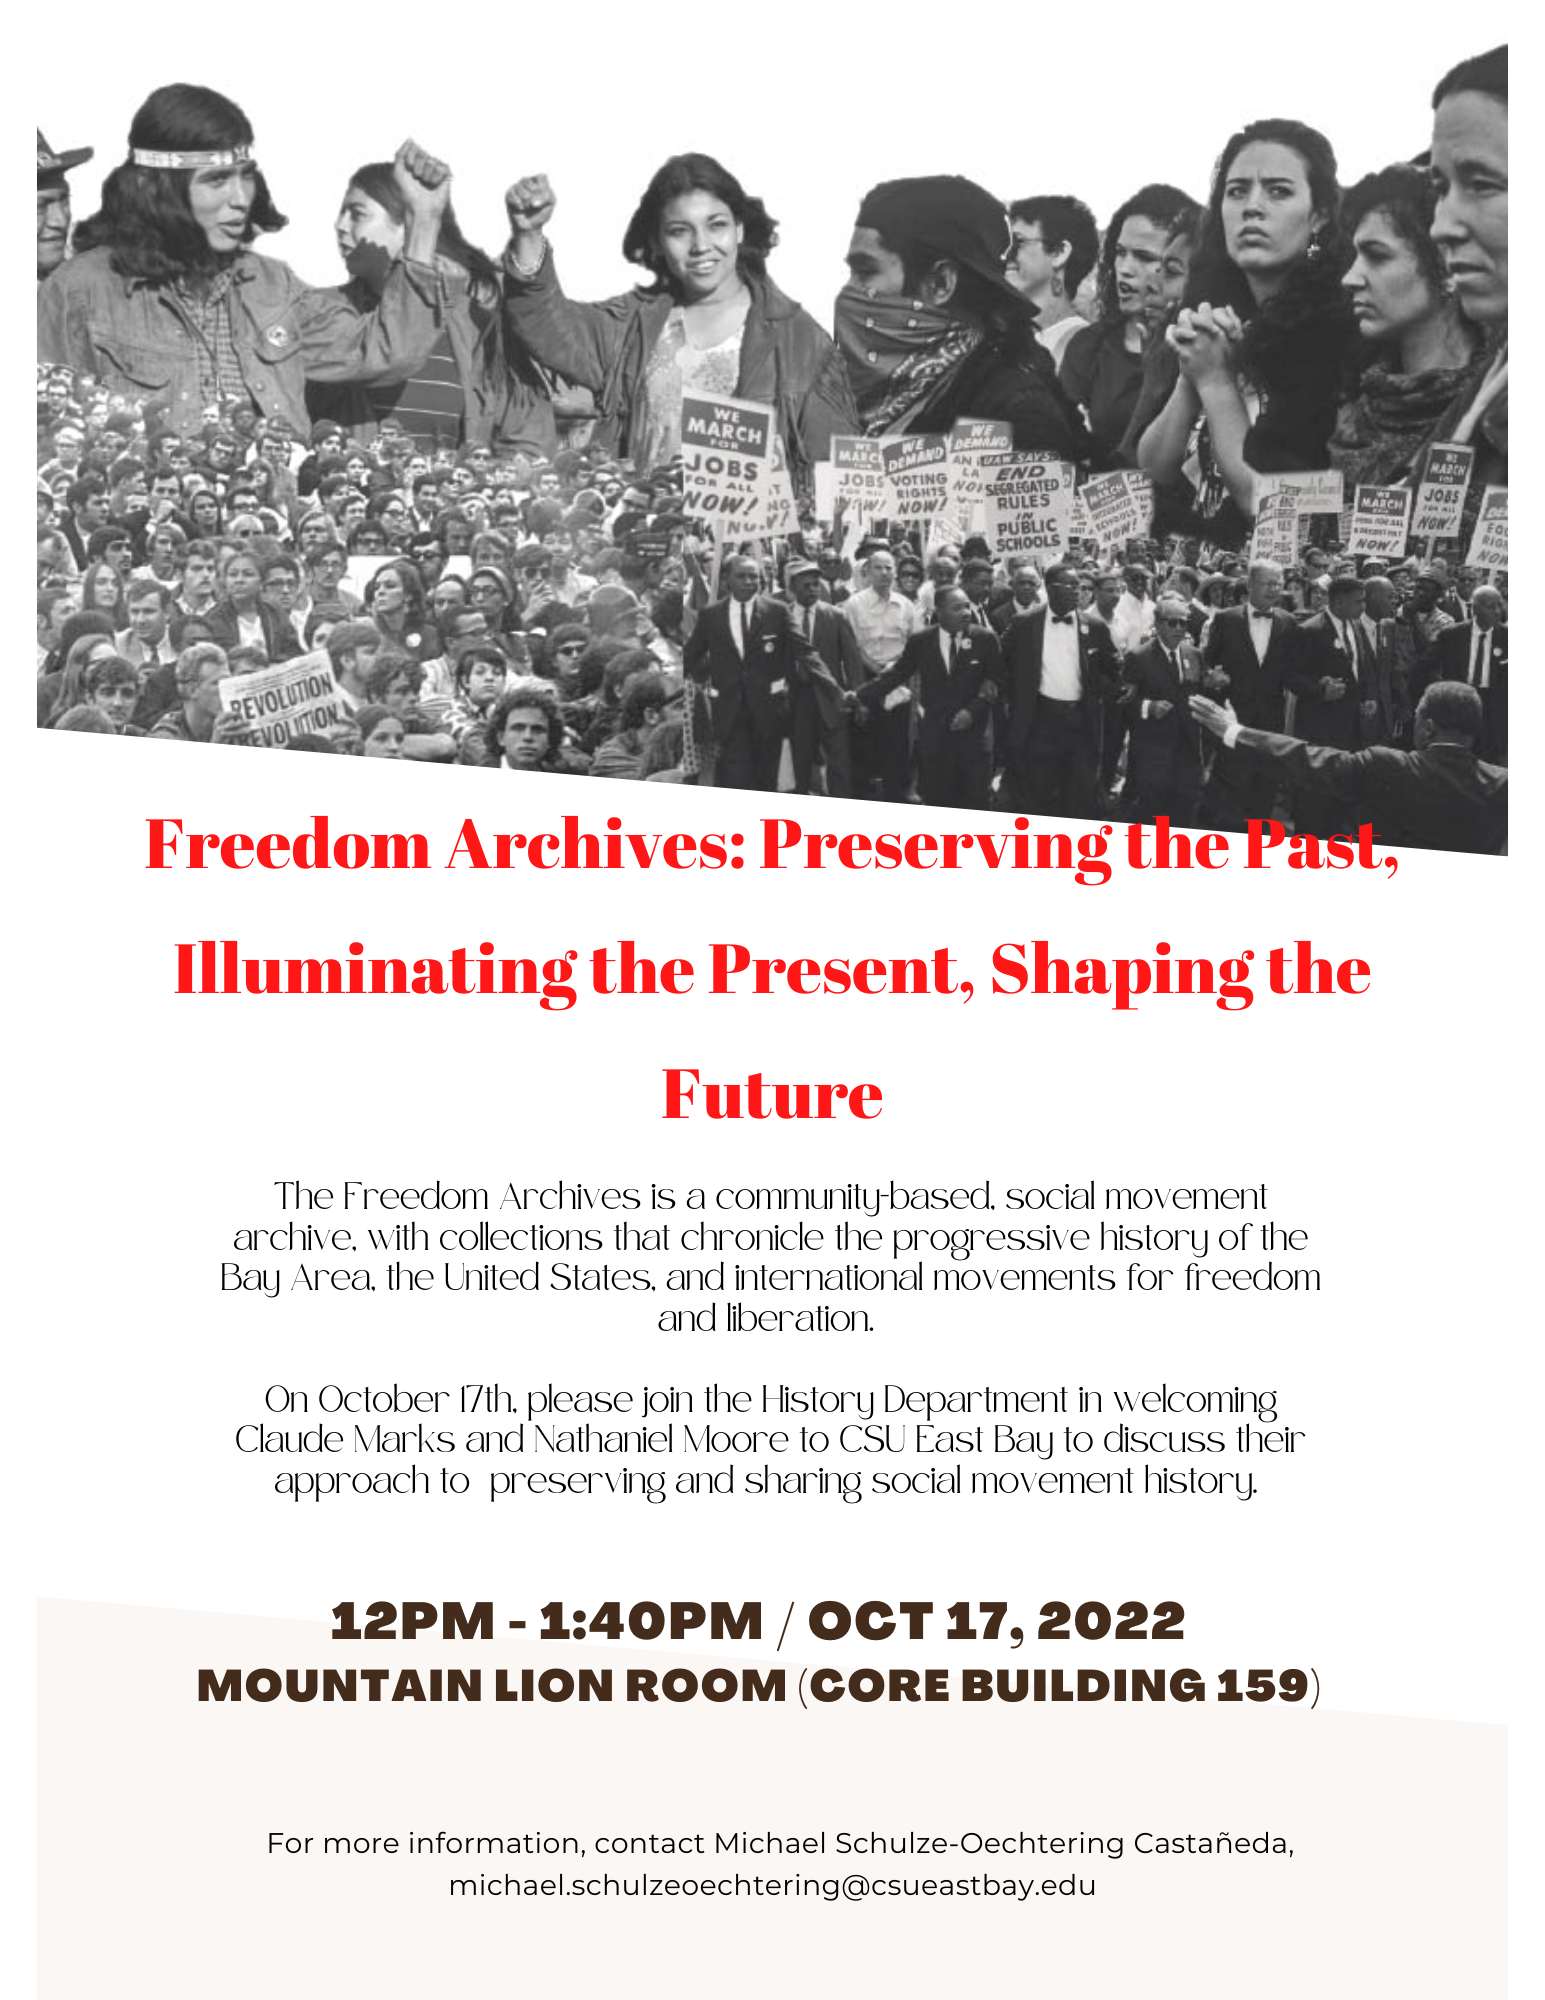 freedom-archives-event-csueb.png